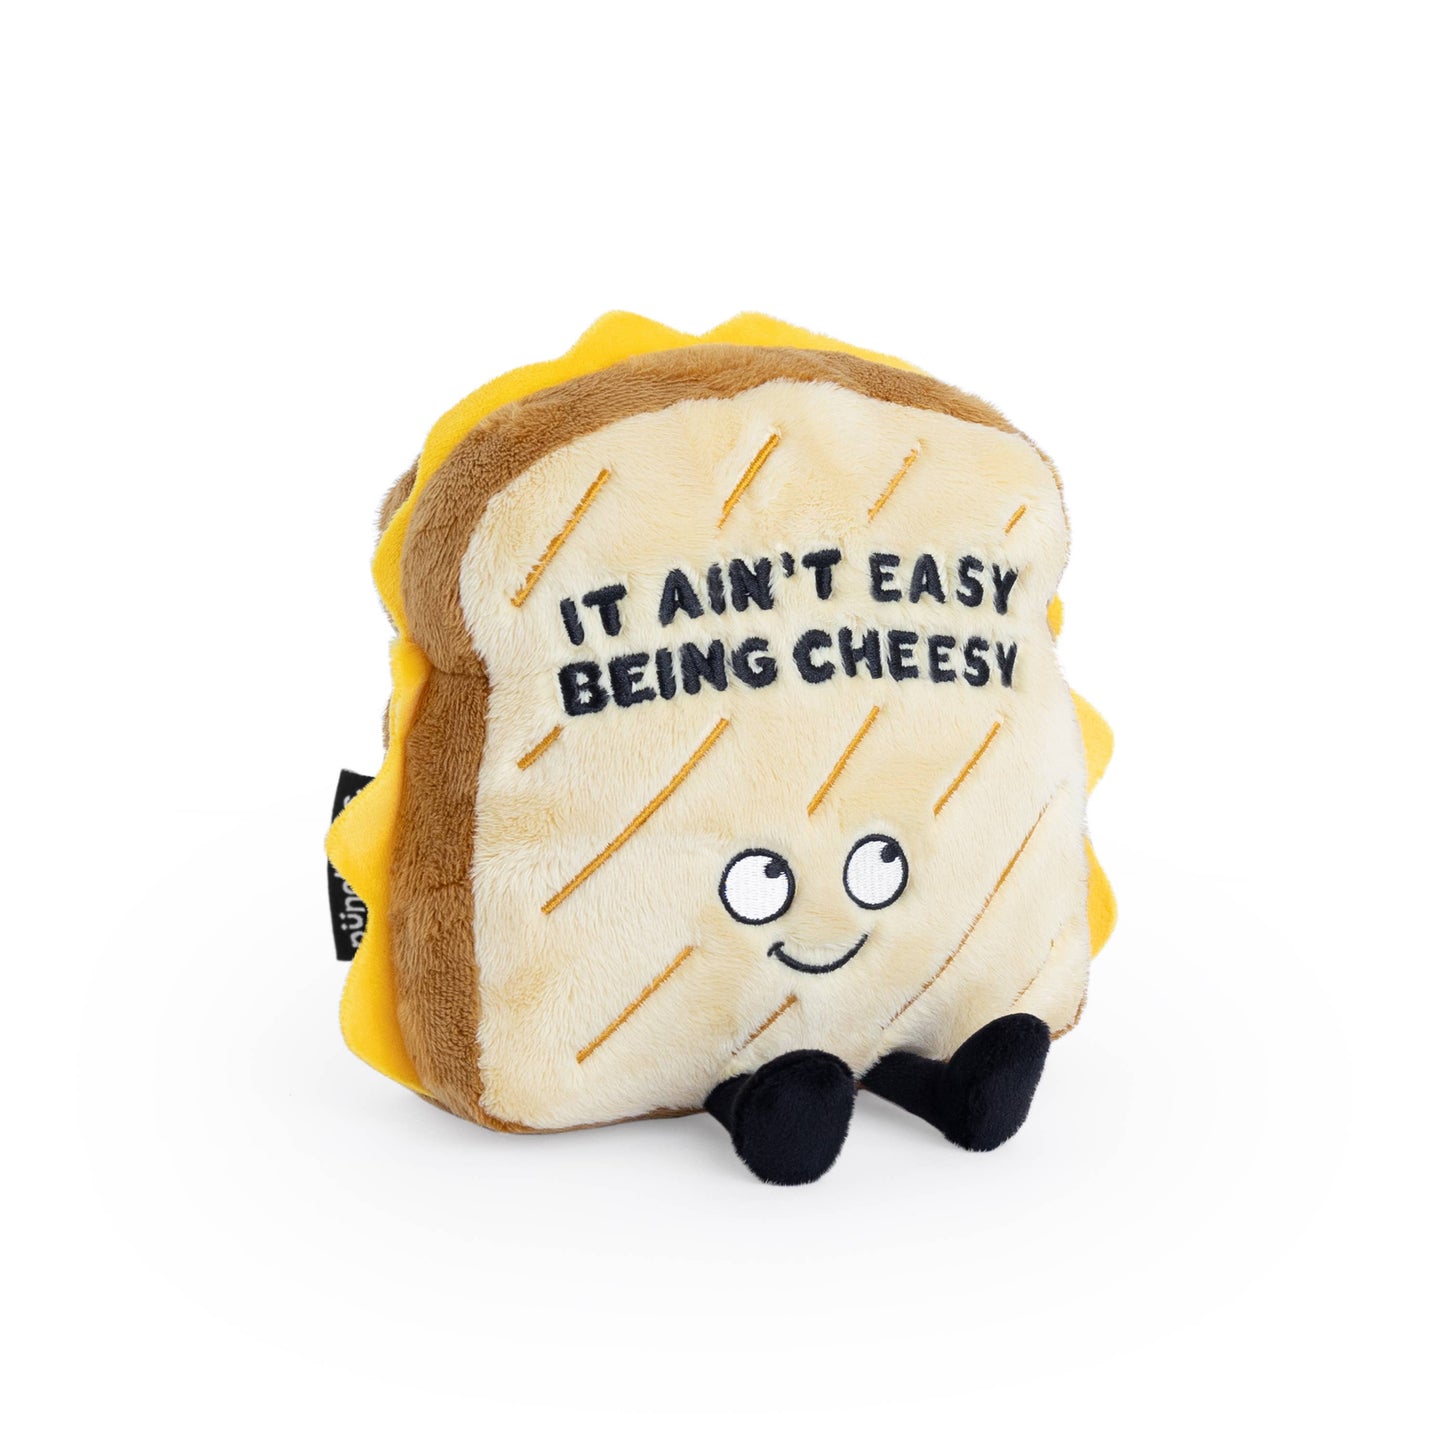 Grilled cheese plush toy that reads "It ain't easy being cheesy" 